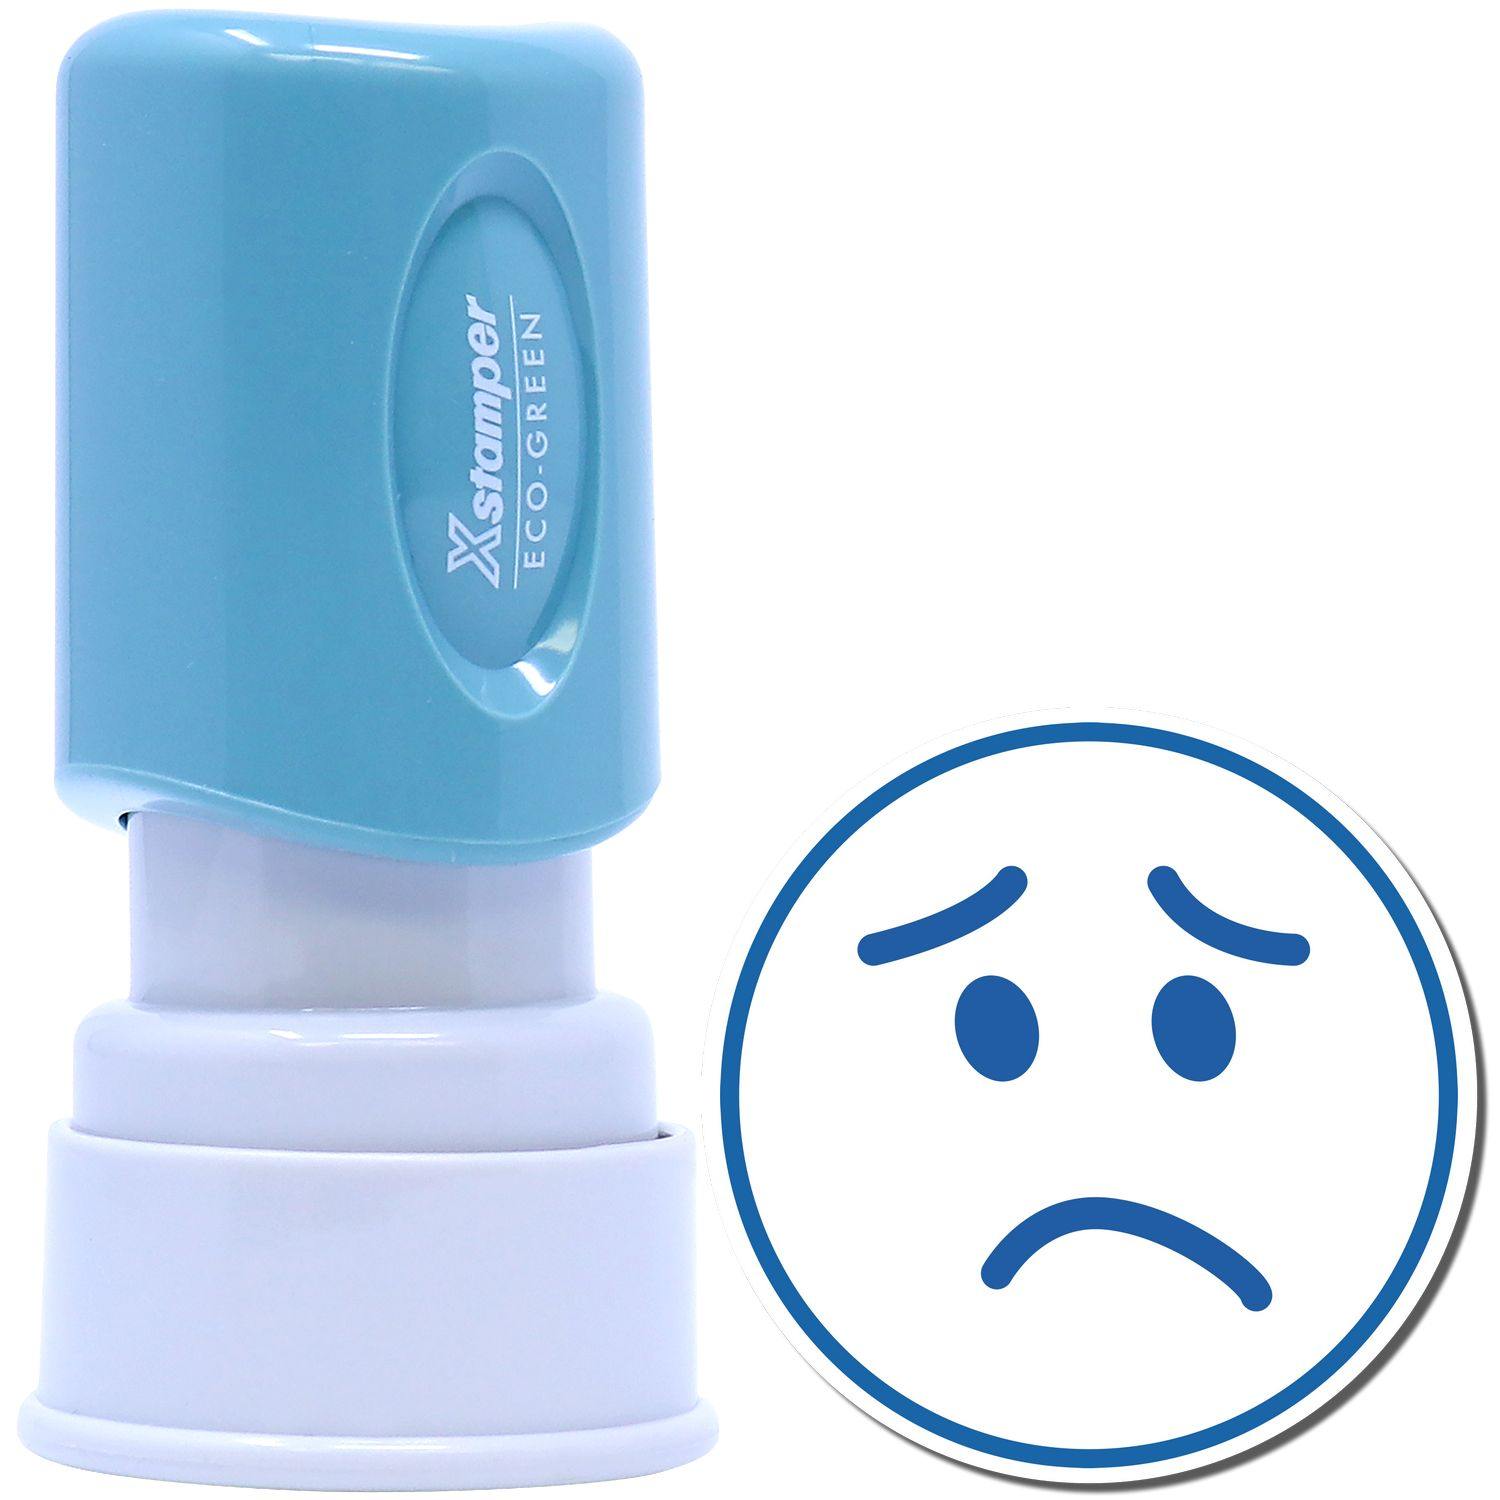 An xstamper stamp with a stamped image showing how a frown face in a round shape is displayed after stamping.